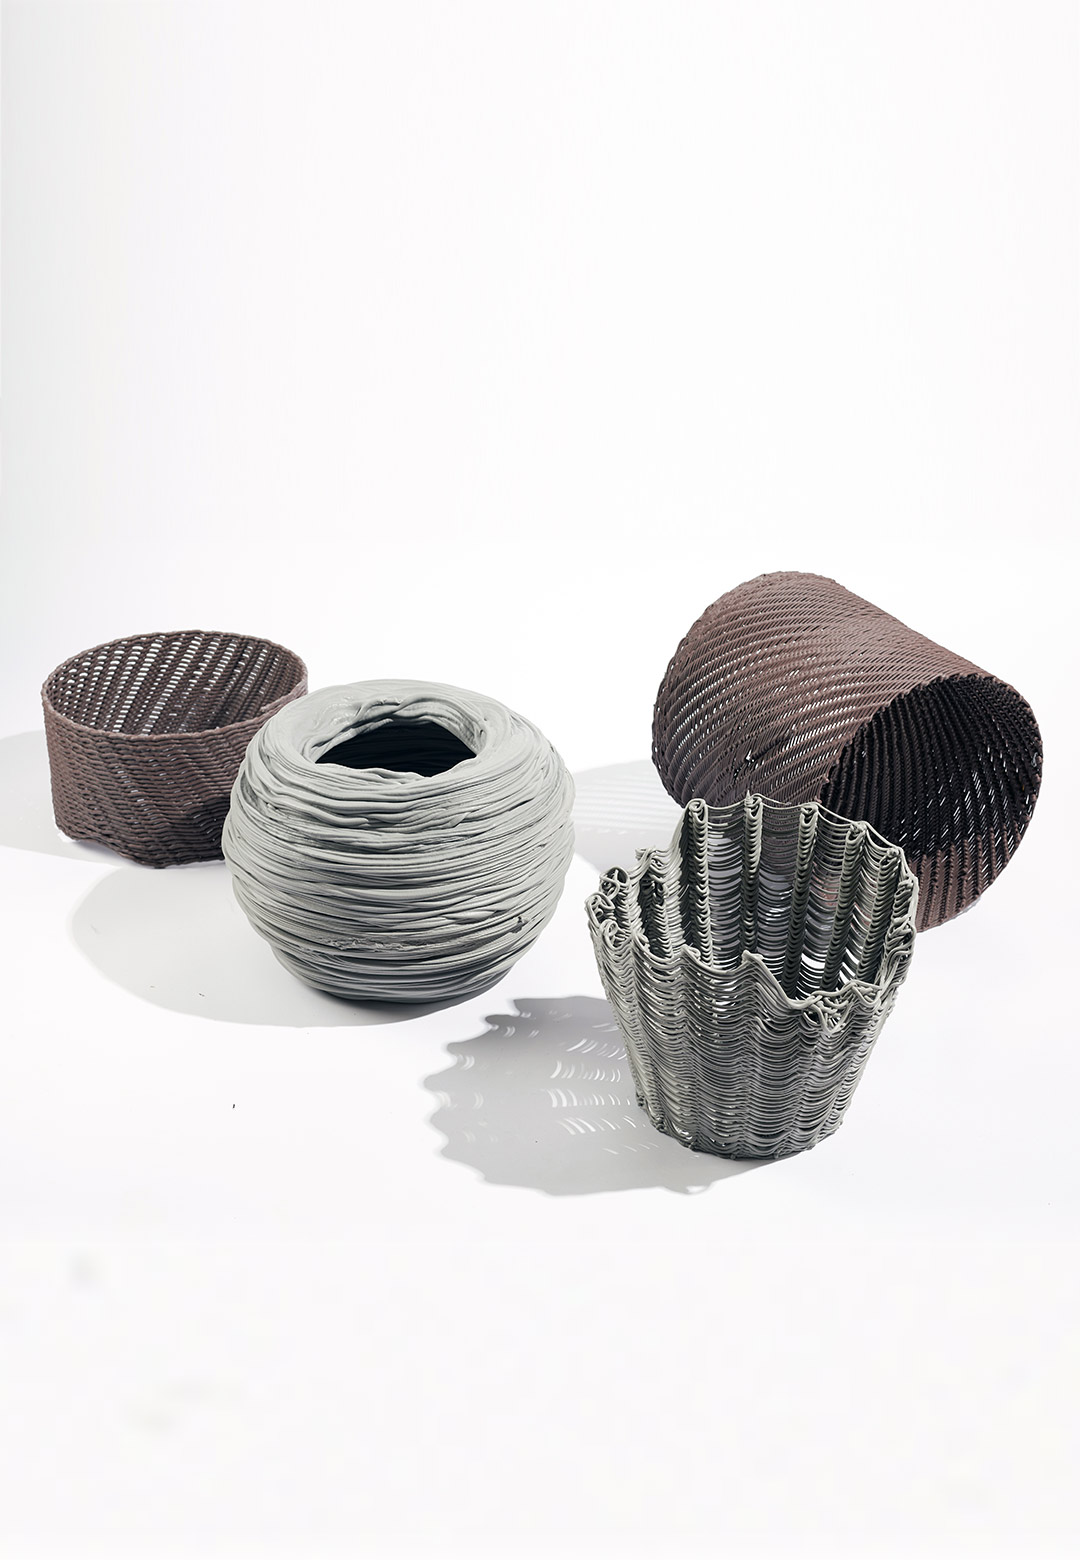 Digital design emulates traditional craft in these ‘Digitally Woven’ objects